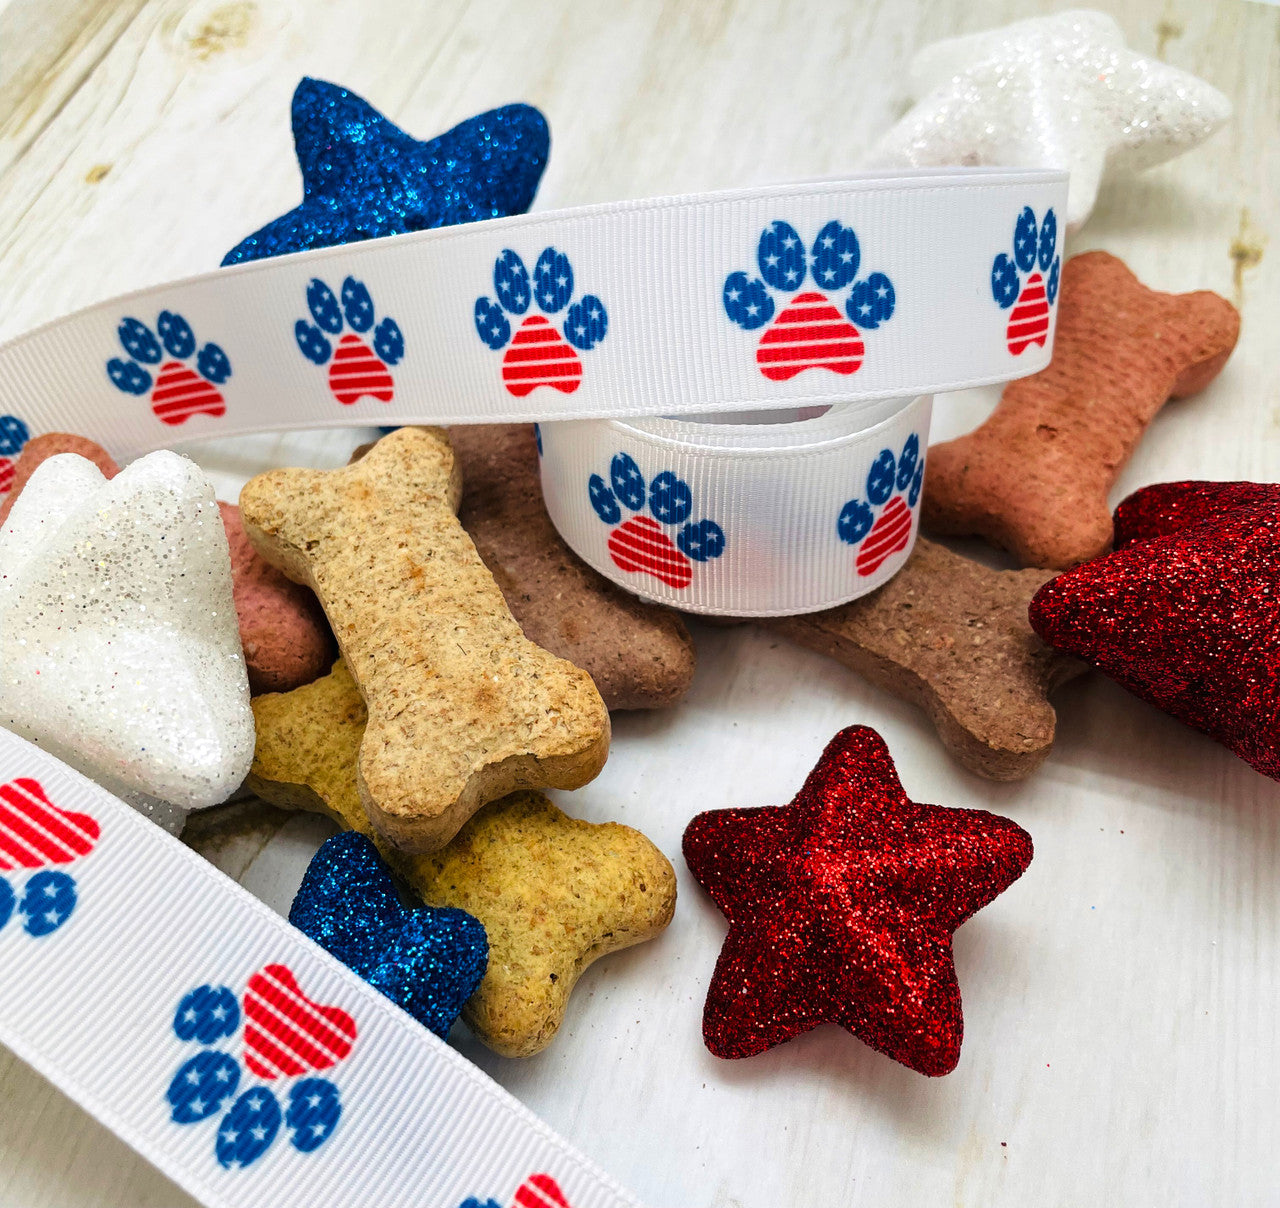 Tie a few dog treats with our patriotic paw prints to bring along to the 4th of July barbecue for the furry family members!